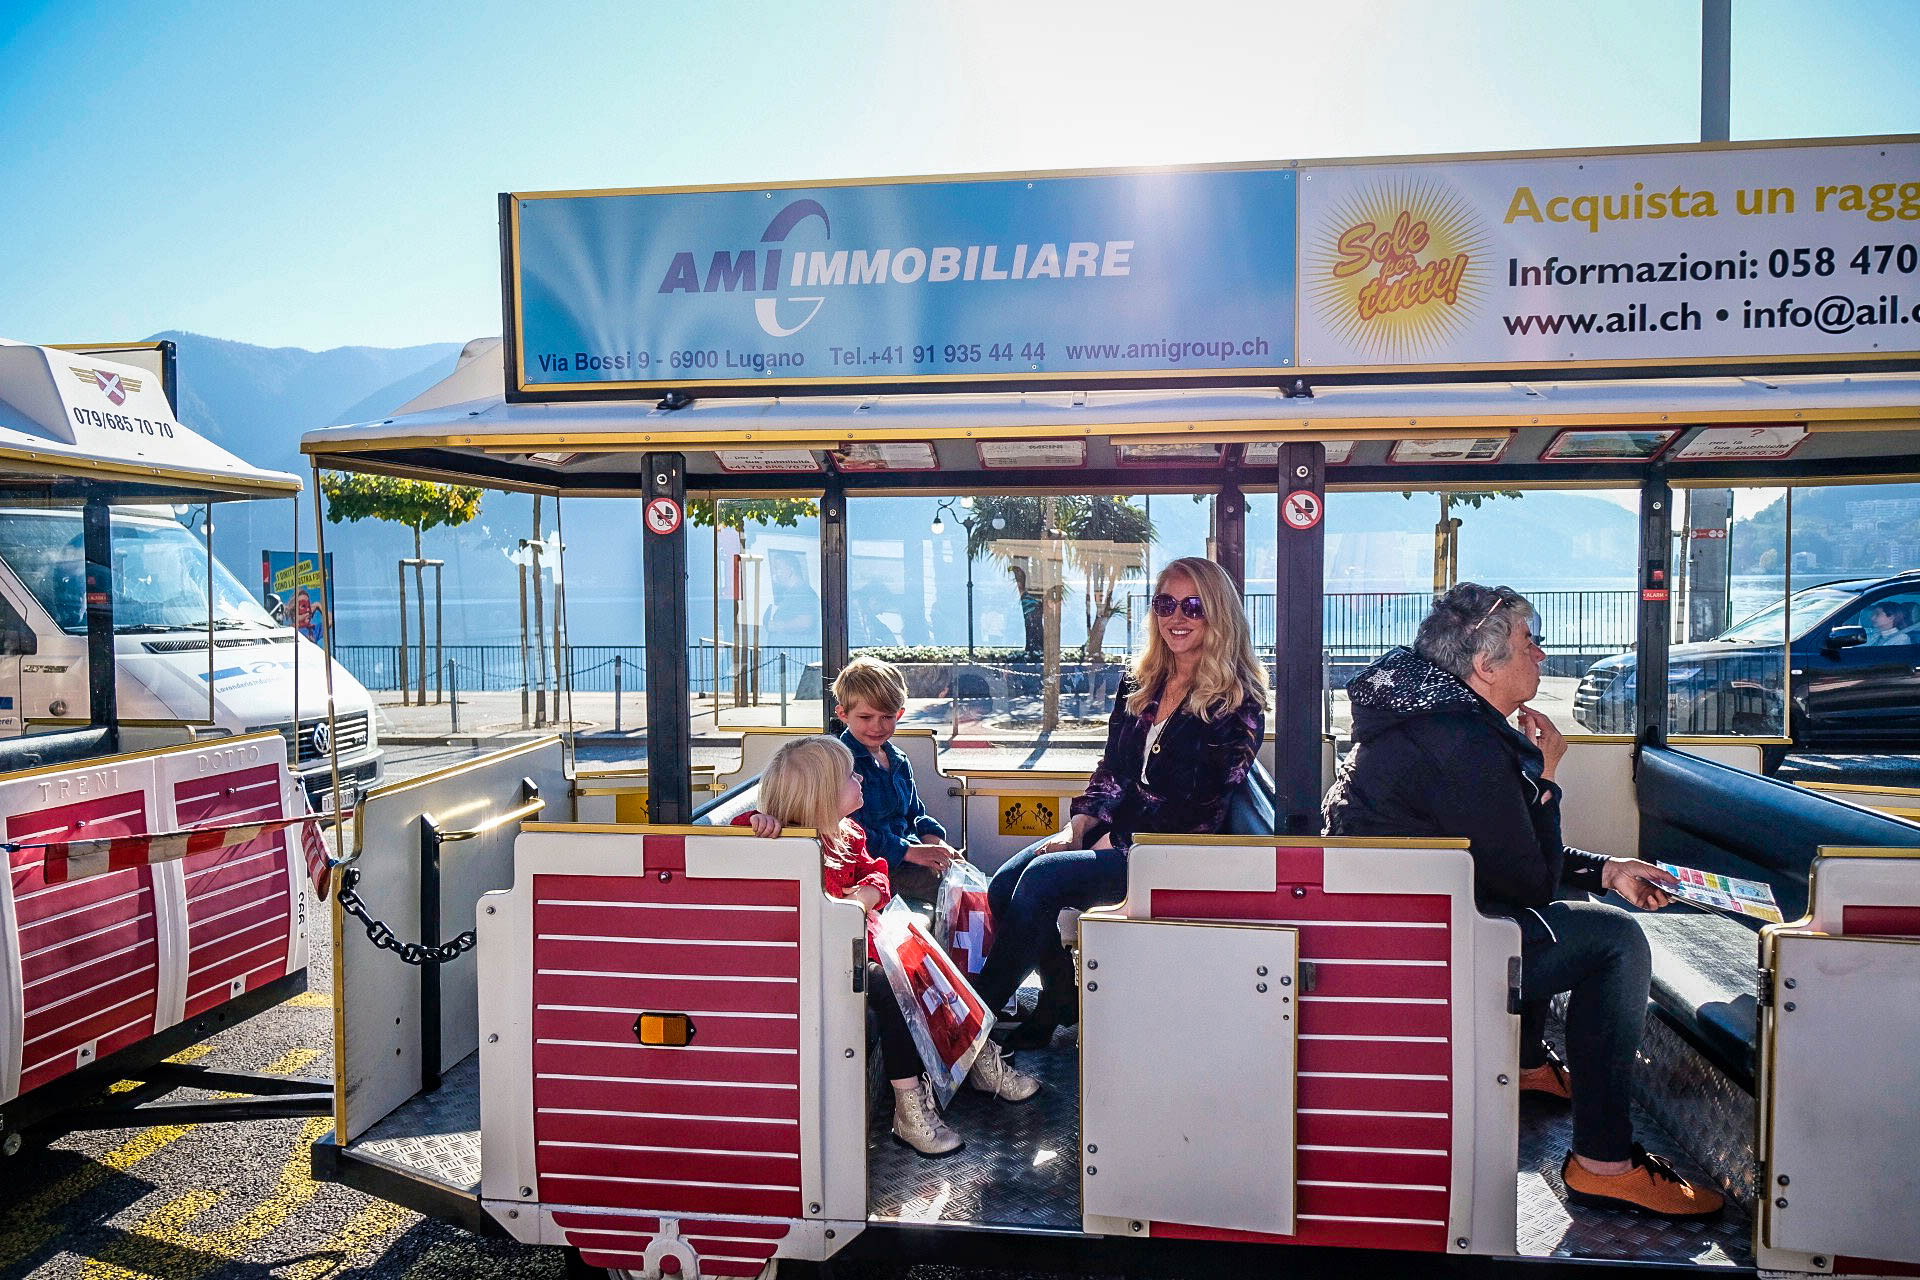 Headed to Lugano Switzerland? Popular Atlanta Blogger Happily Hughes is sharing where to eat, stay and do in her Family Travel Guide to Lugano Switzerland here!